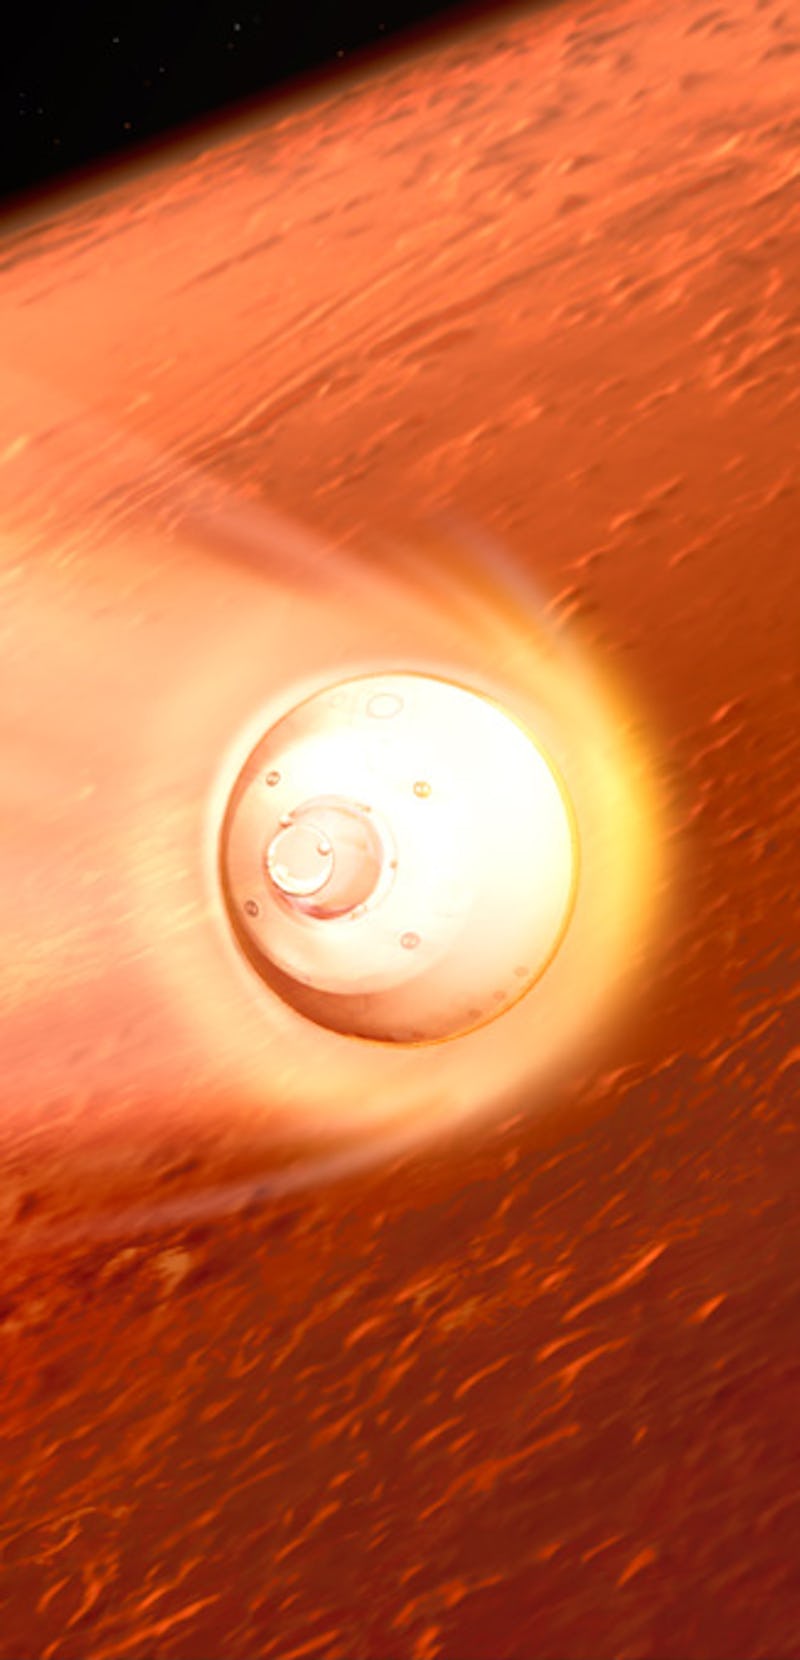 An illustration of the spacecraft carrying the Perseverance rover entering the Martian atmosphere.